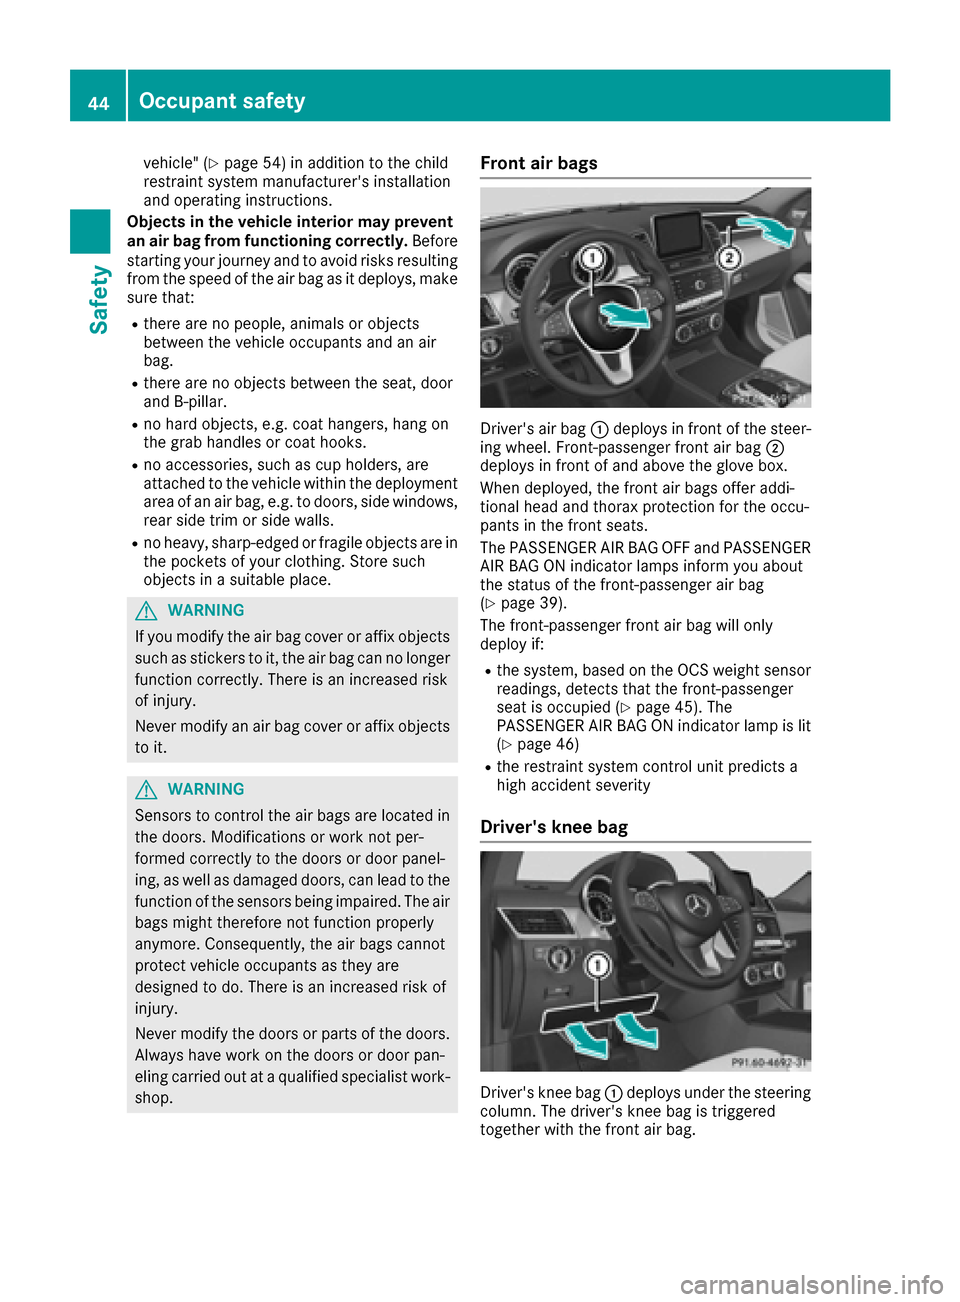 MERCEDES-BENZ GLE-Class 2016 C292 Owners Manual vehicle" (Ypage 54) in addition to the child
restraint system manufacturers installation
and operating instructions.
Objects in the vehicle interior may prevent
an air bag from functioning correctly.